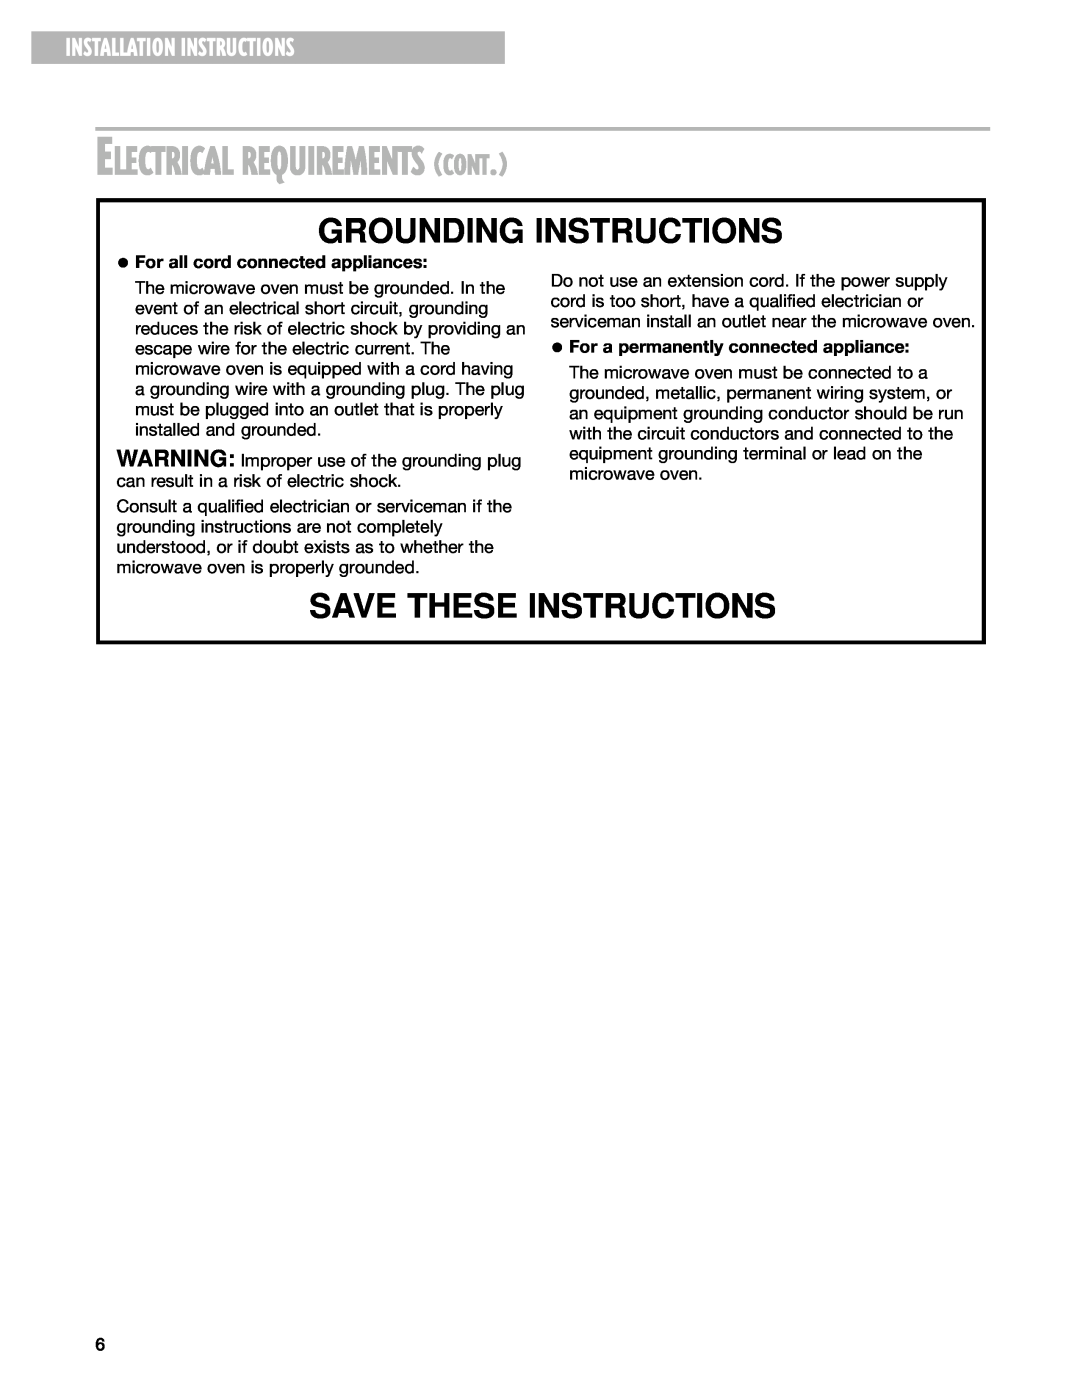 Whirlpool GT4185SK Electrical Requirements Cont, Grounding Instructions, Installation Instructions 